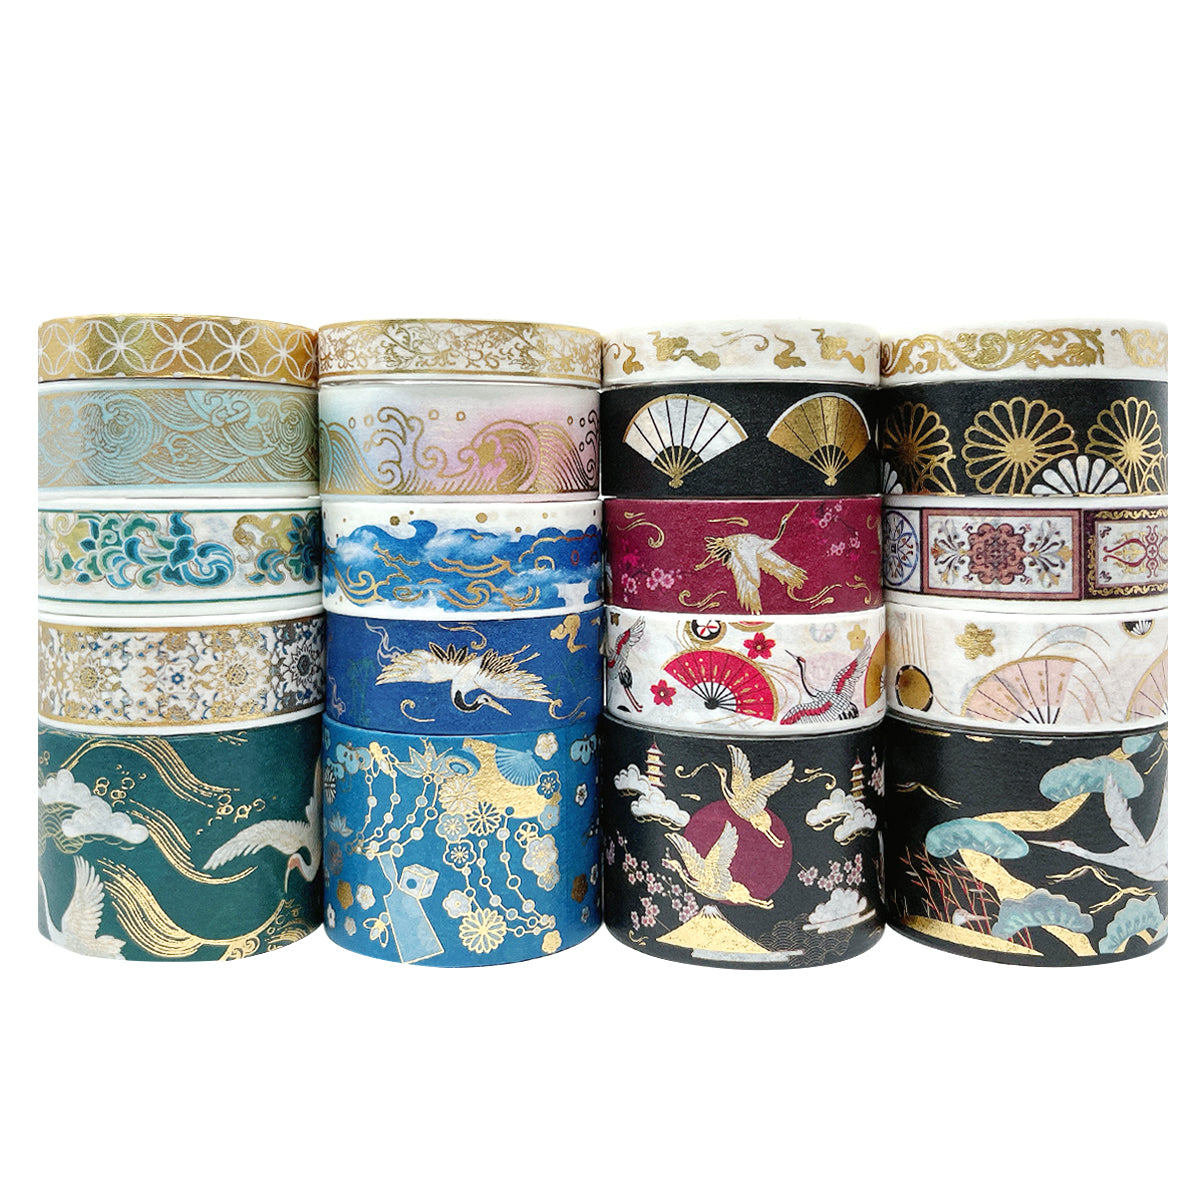 AEBORN Christmas Washi Tape Set - 21 Rolls Gold Foil Holiday Decorative Tapes Perfect for Bullet Journal, Scrapbook, Gift Packaging, DIY Crafts